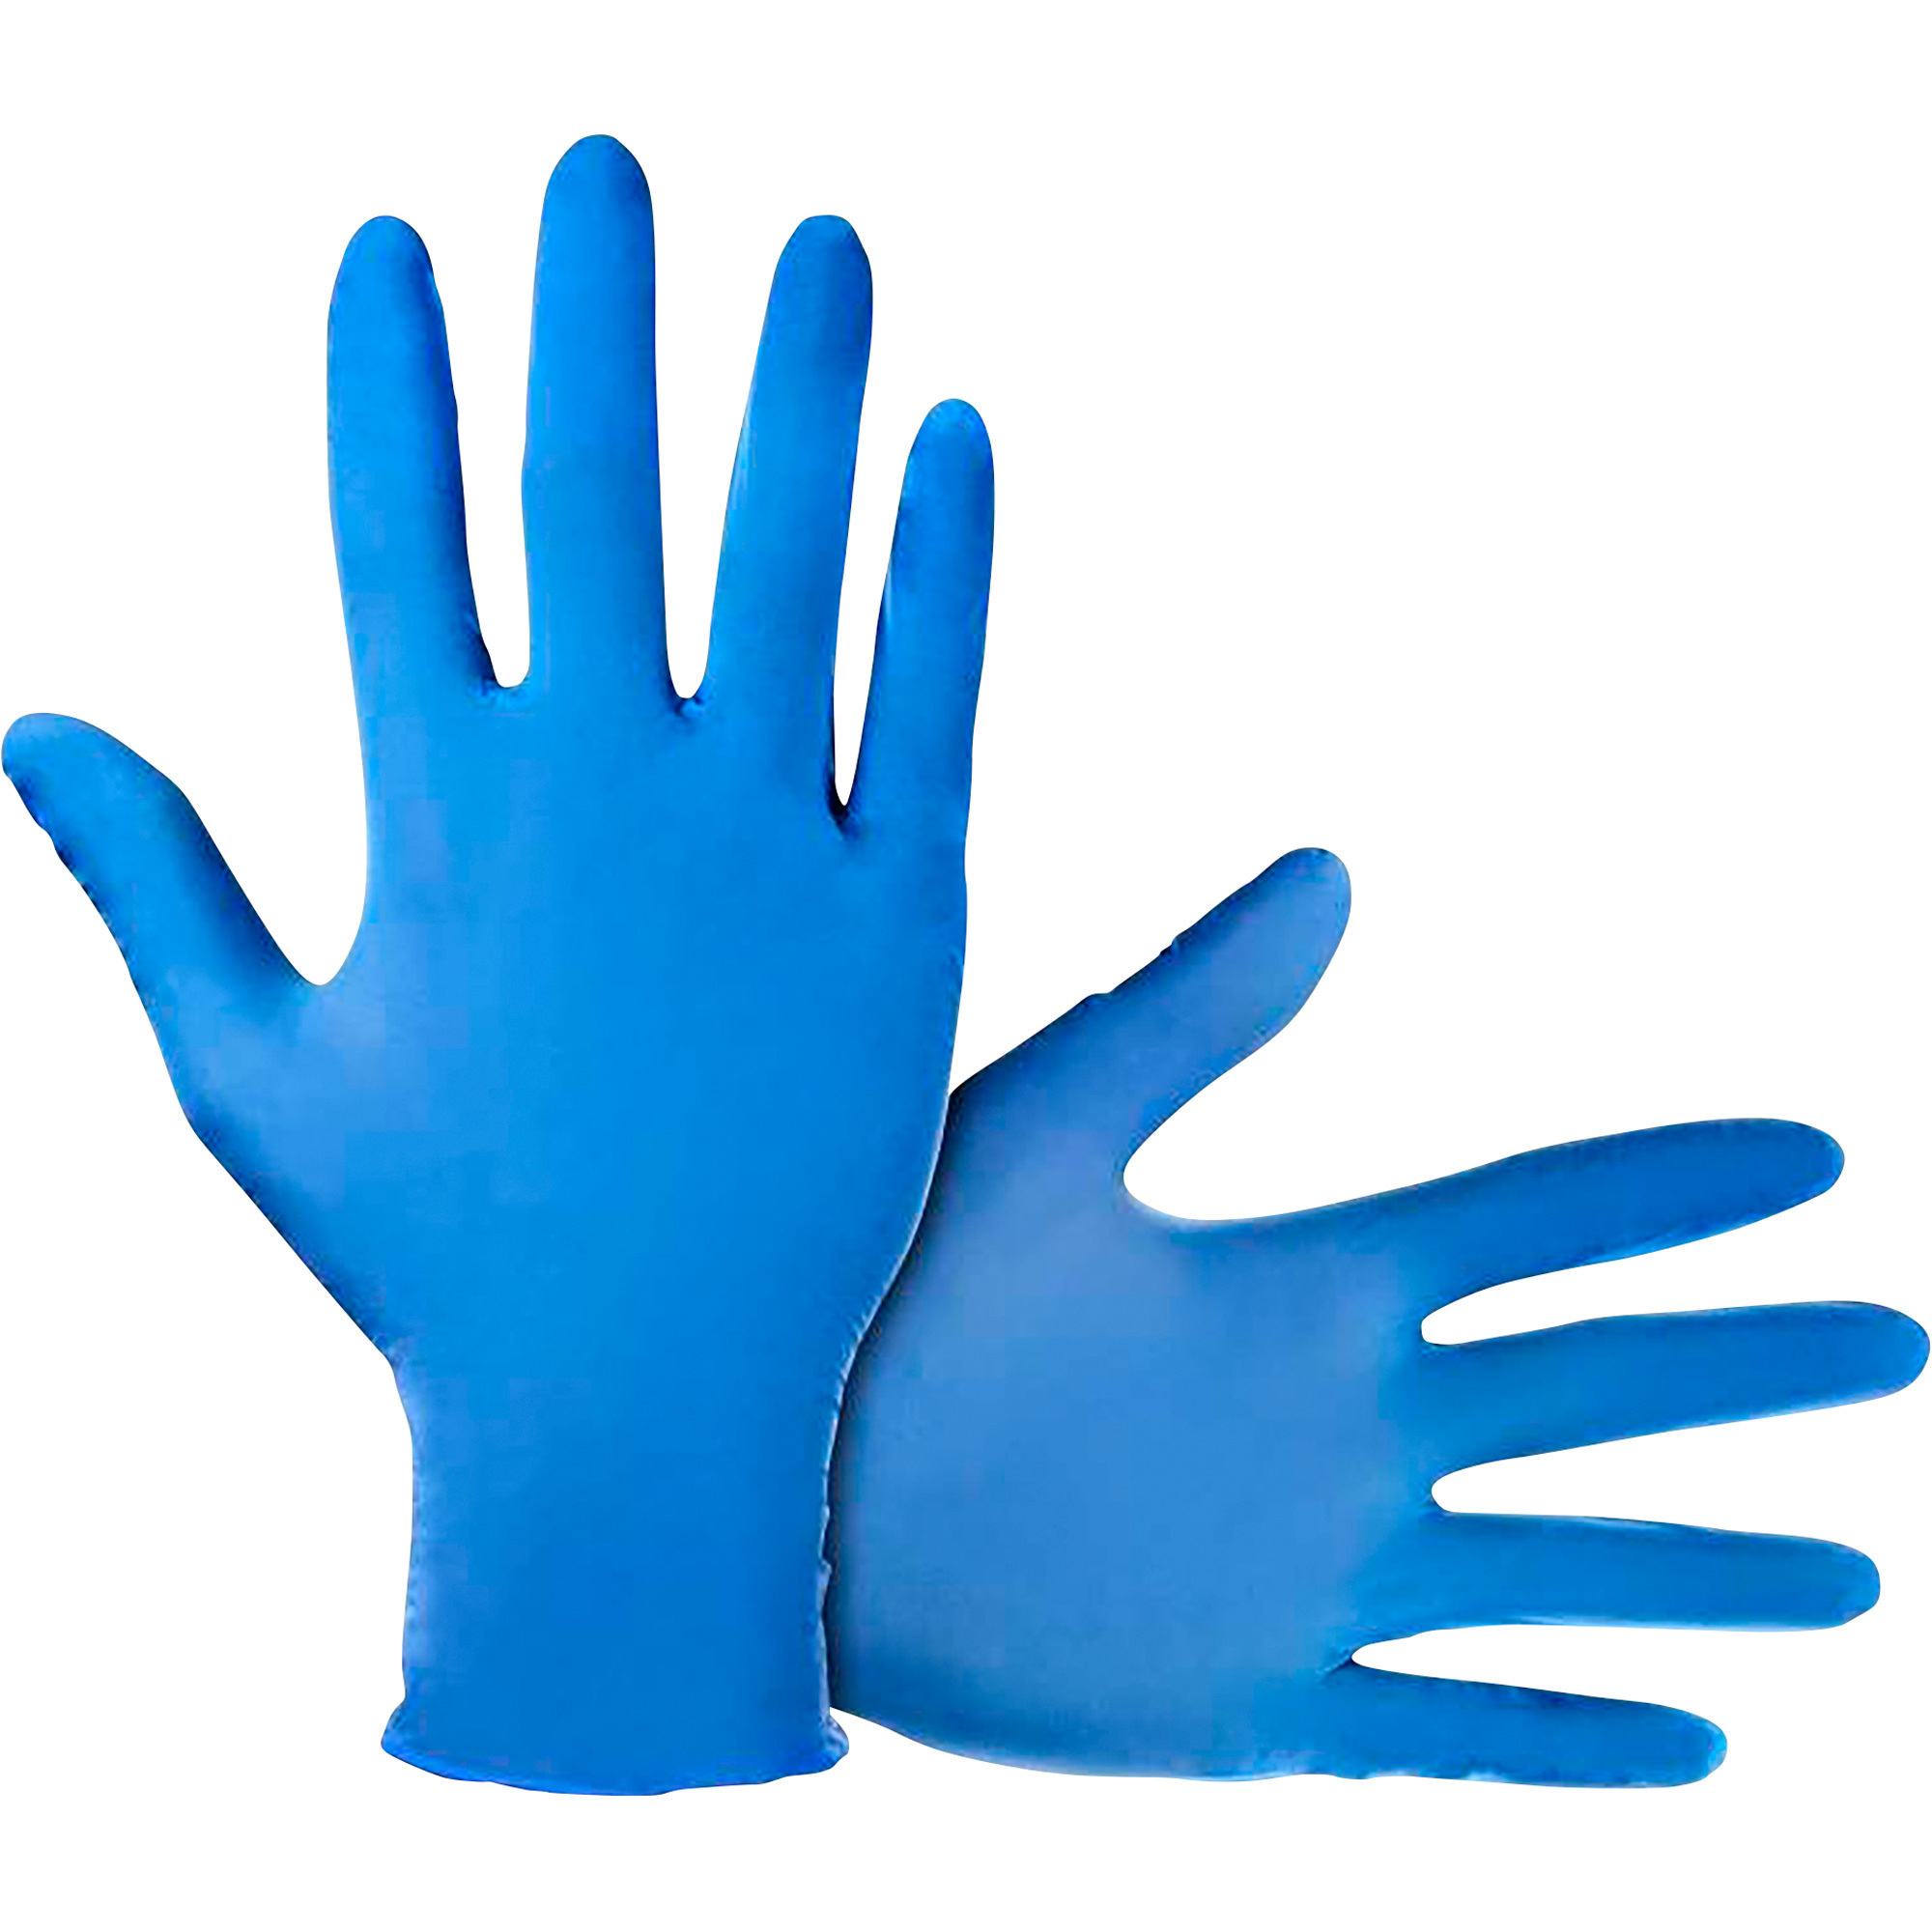 Sure Touch Powder-Free Non-Latex Disposable Safety Gloves, 100-Count, Blue, Medium, Model 4522pfm